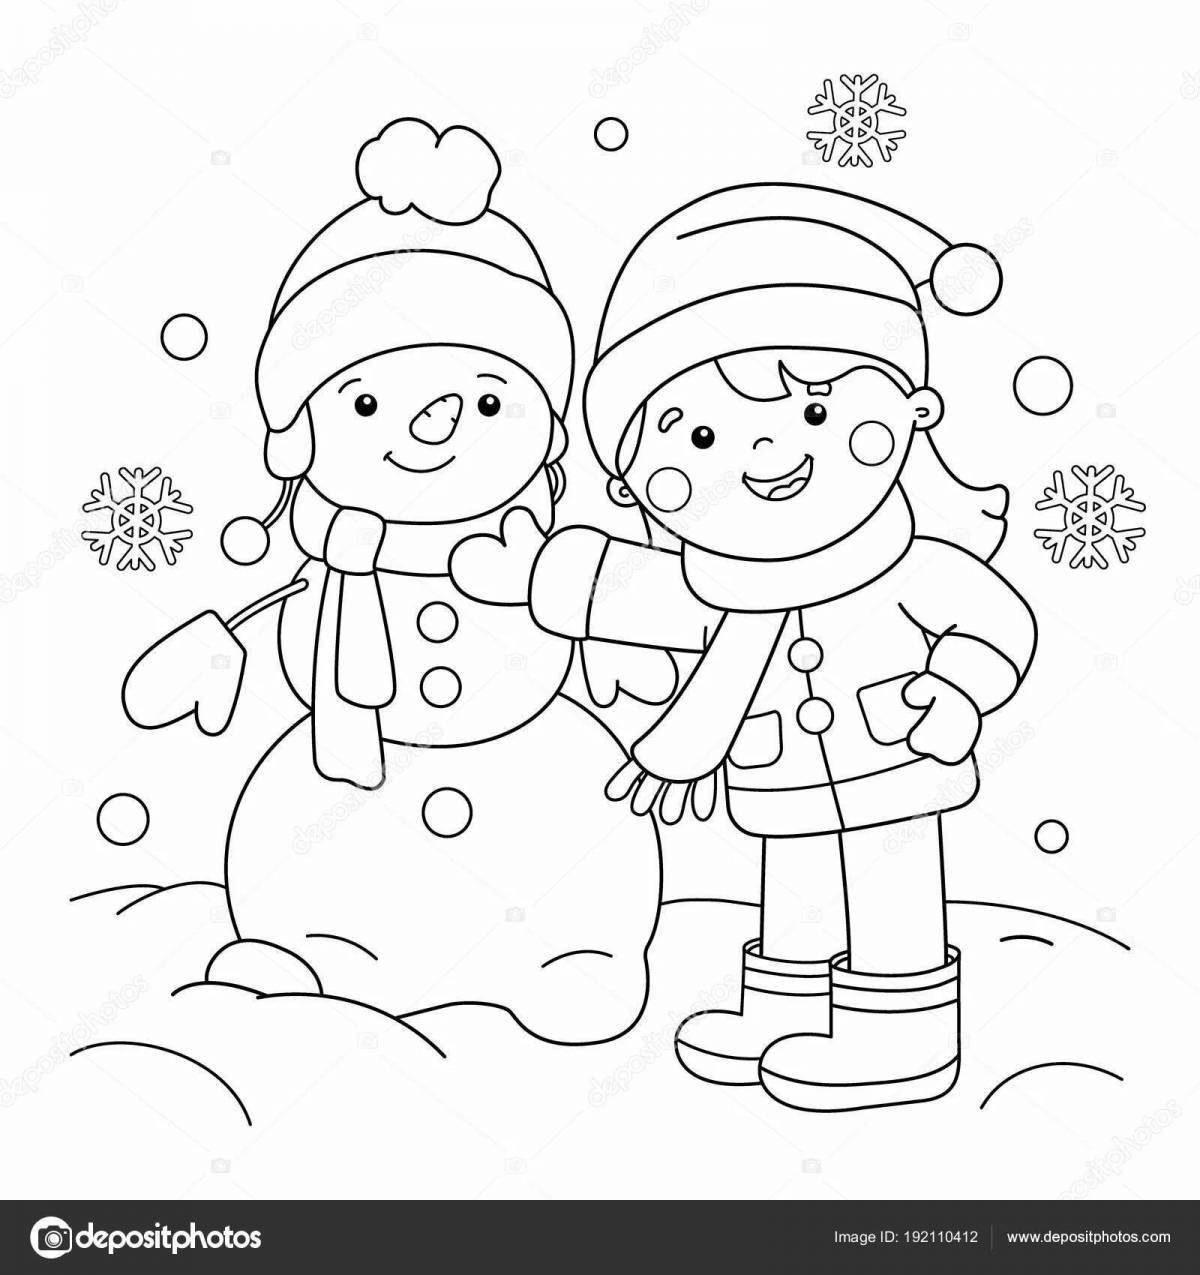 Inviting winter coloring book for children 2-3 years old